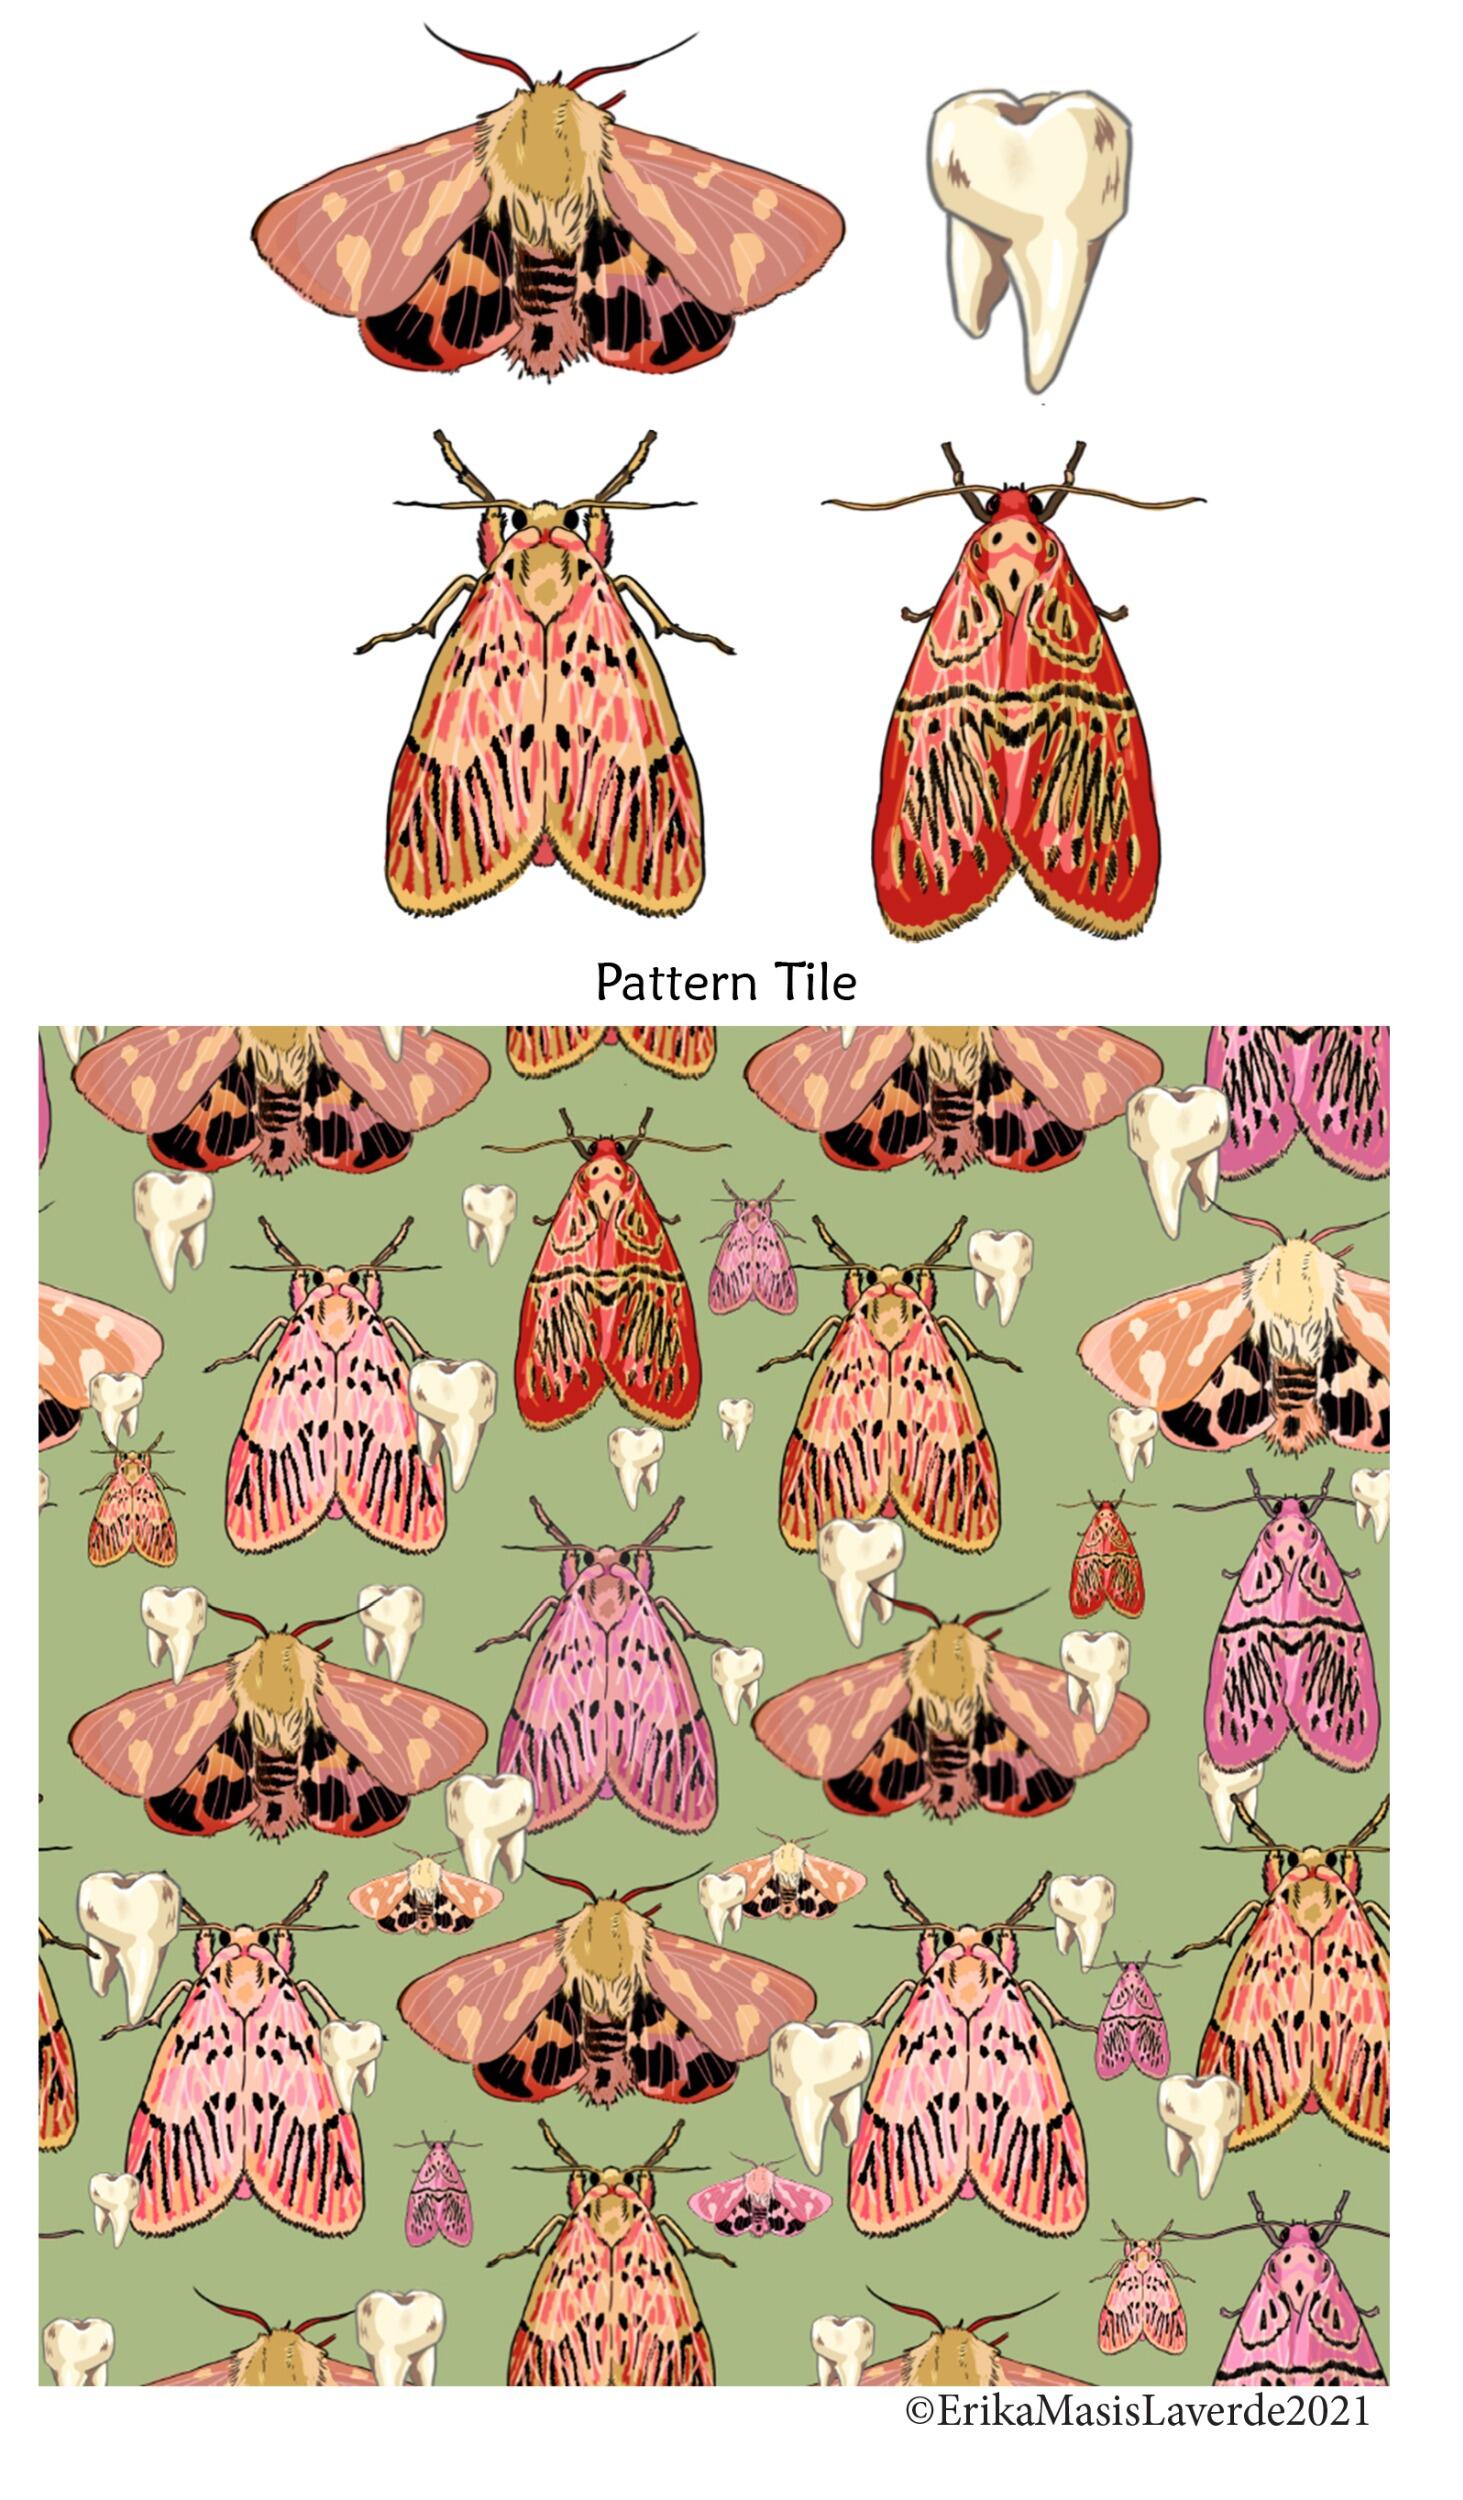 Pattern studies of butterflies by Erika Masis Laverde done in digital media as a part of a larger project for digital drawing.